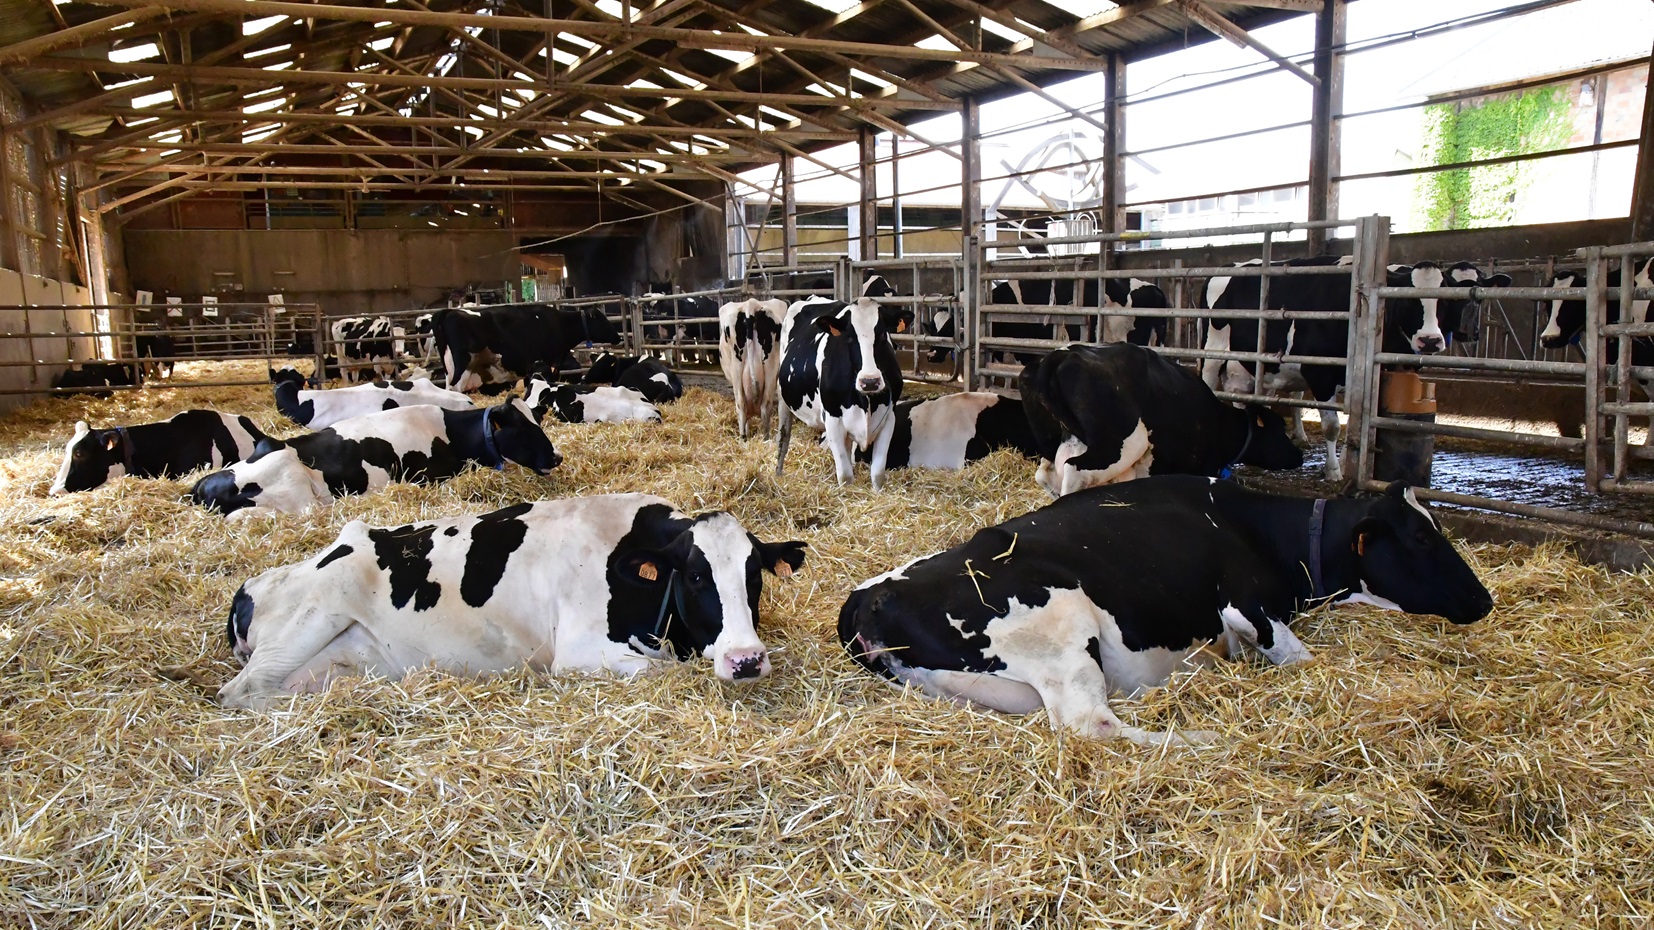 Lying cows in a stable that ruminate